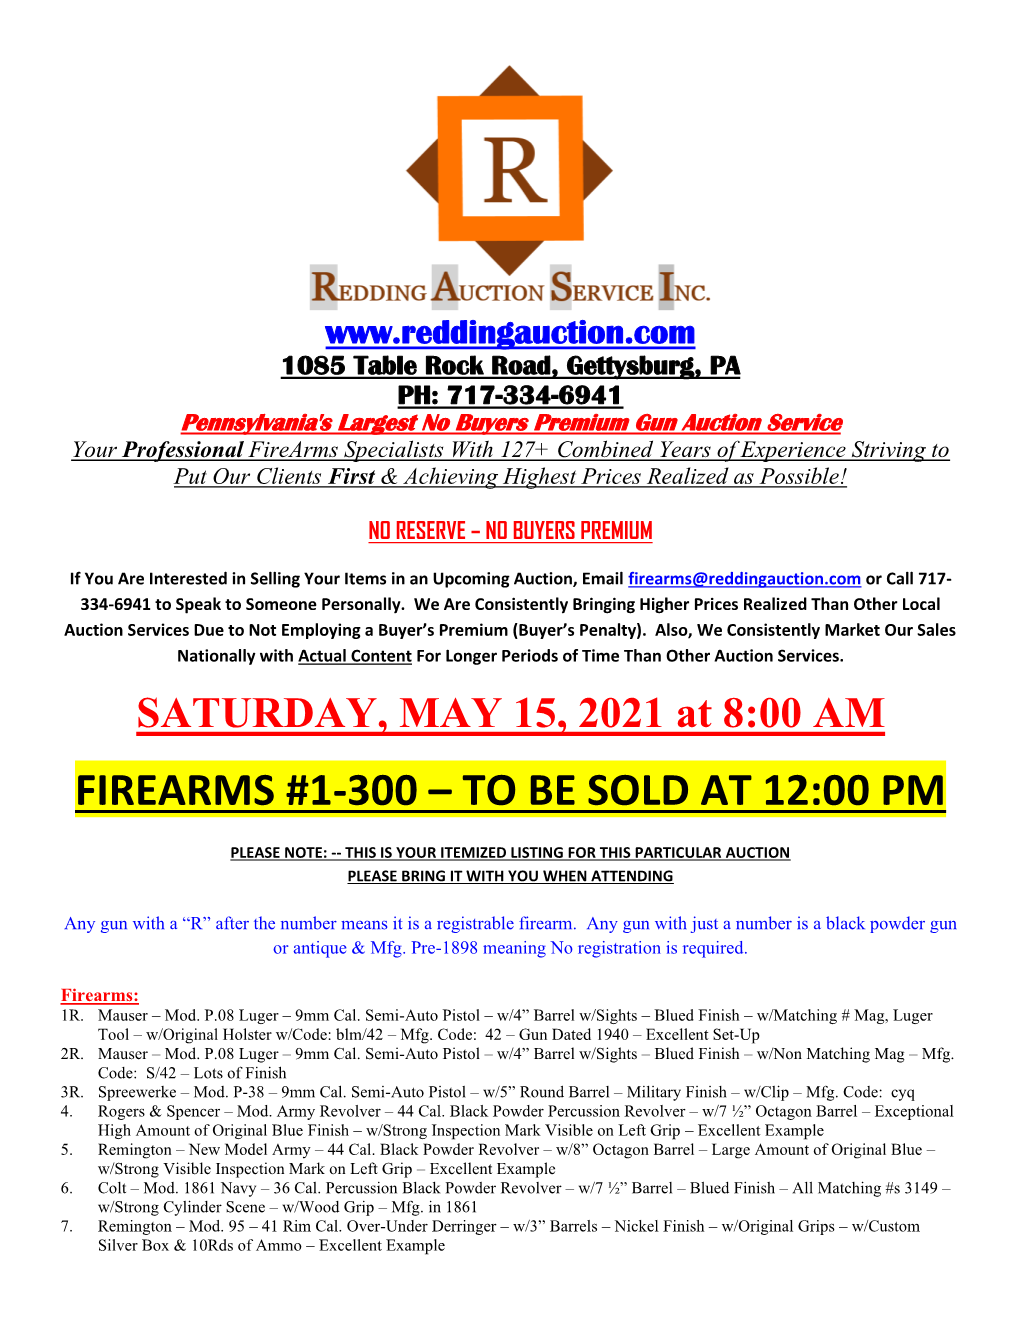 Firearms #1-300 – to Be Sold at 12:00 Pm